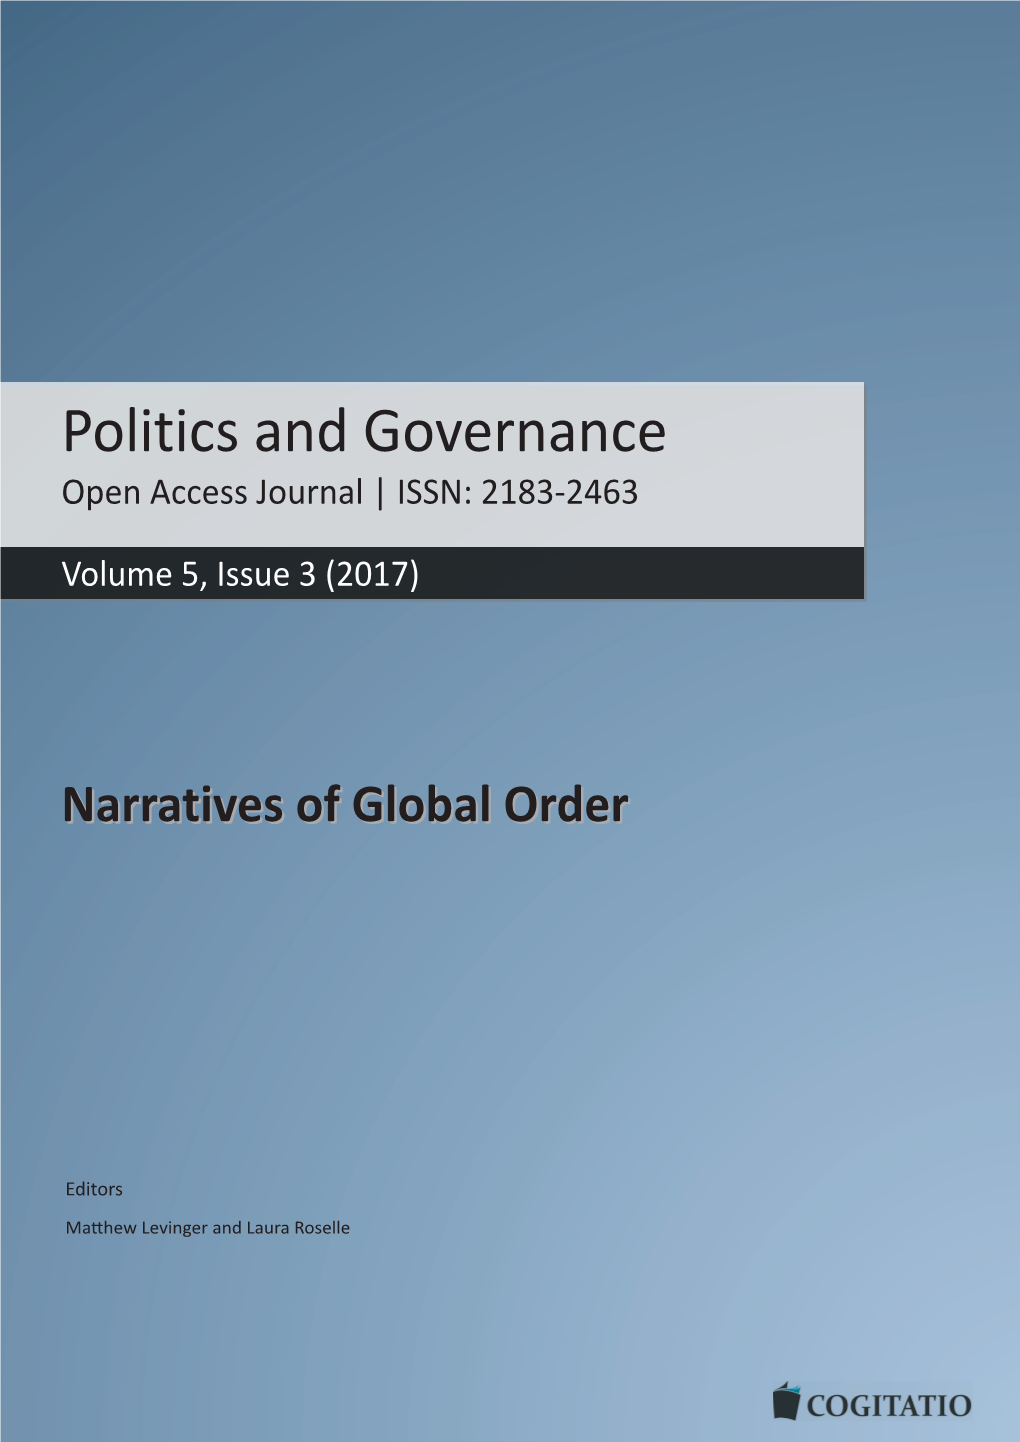 Strategic Narratives and Alliances: the Cases of Intervention in Libya (2011) and Economic Sanctions Against Russia (2014) Laura Roselle 99–110